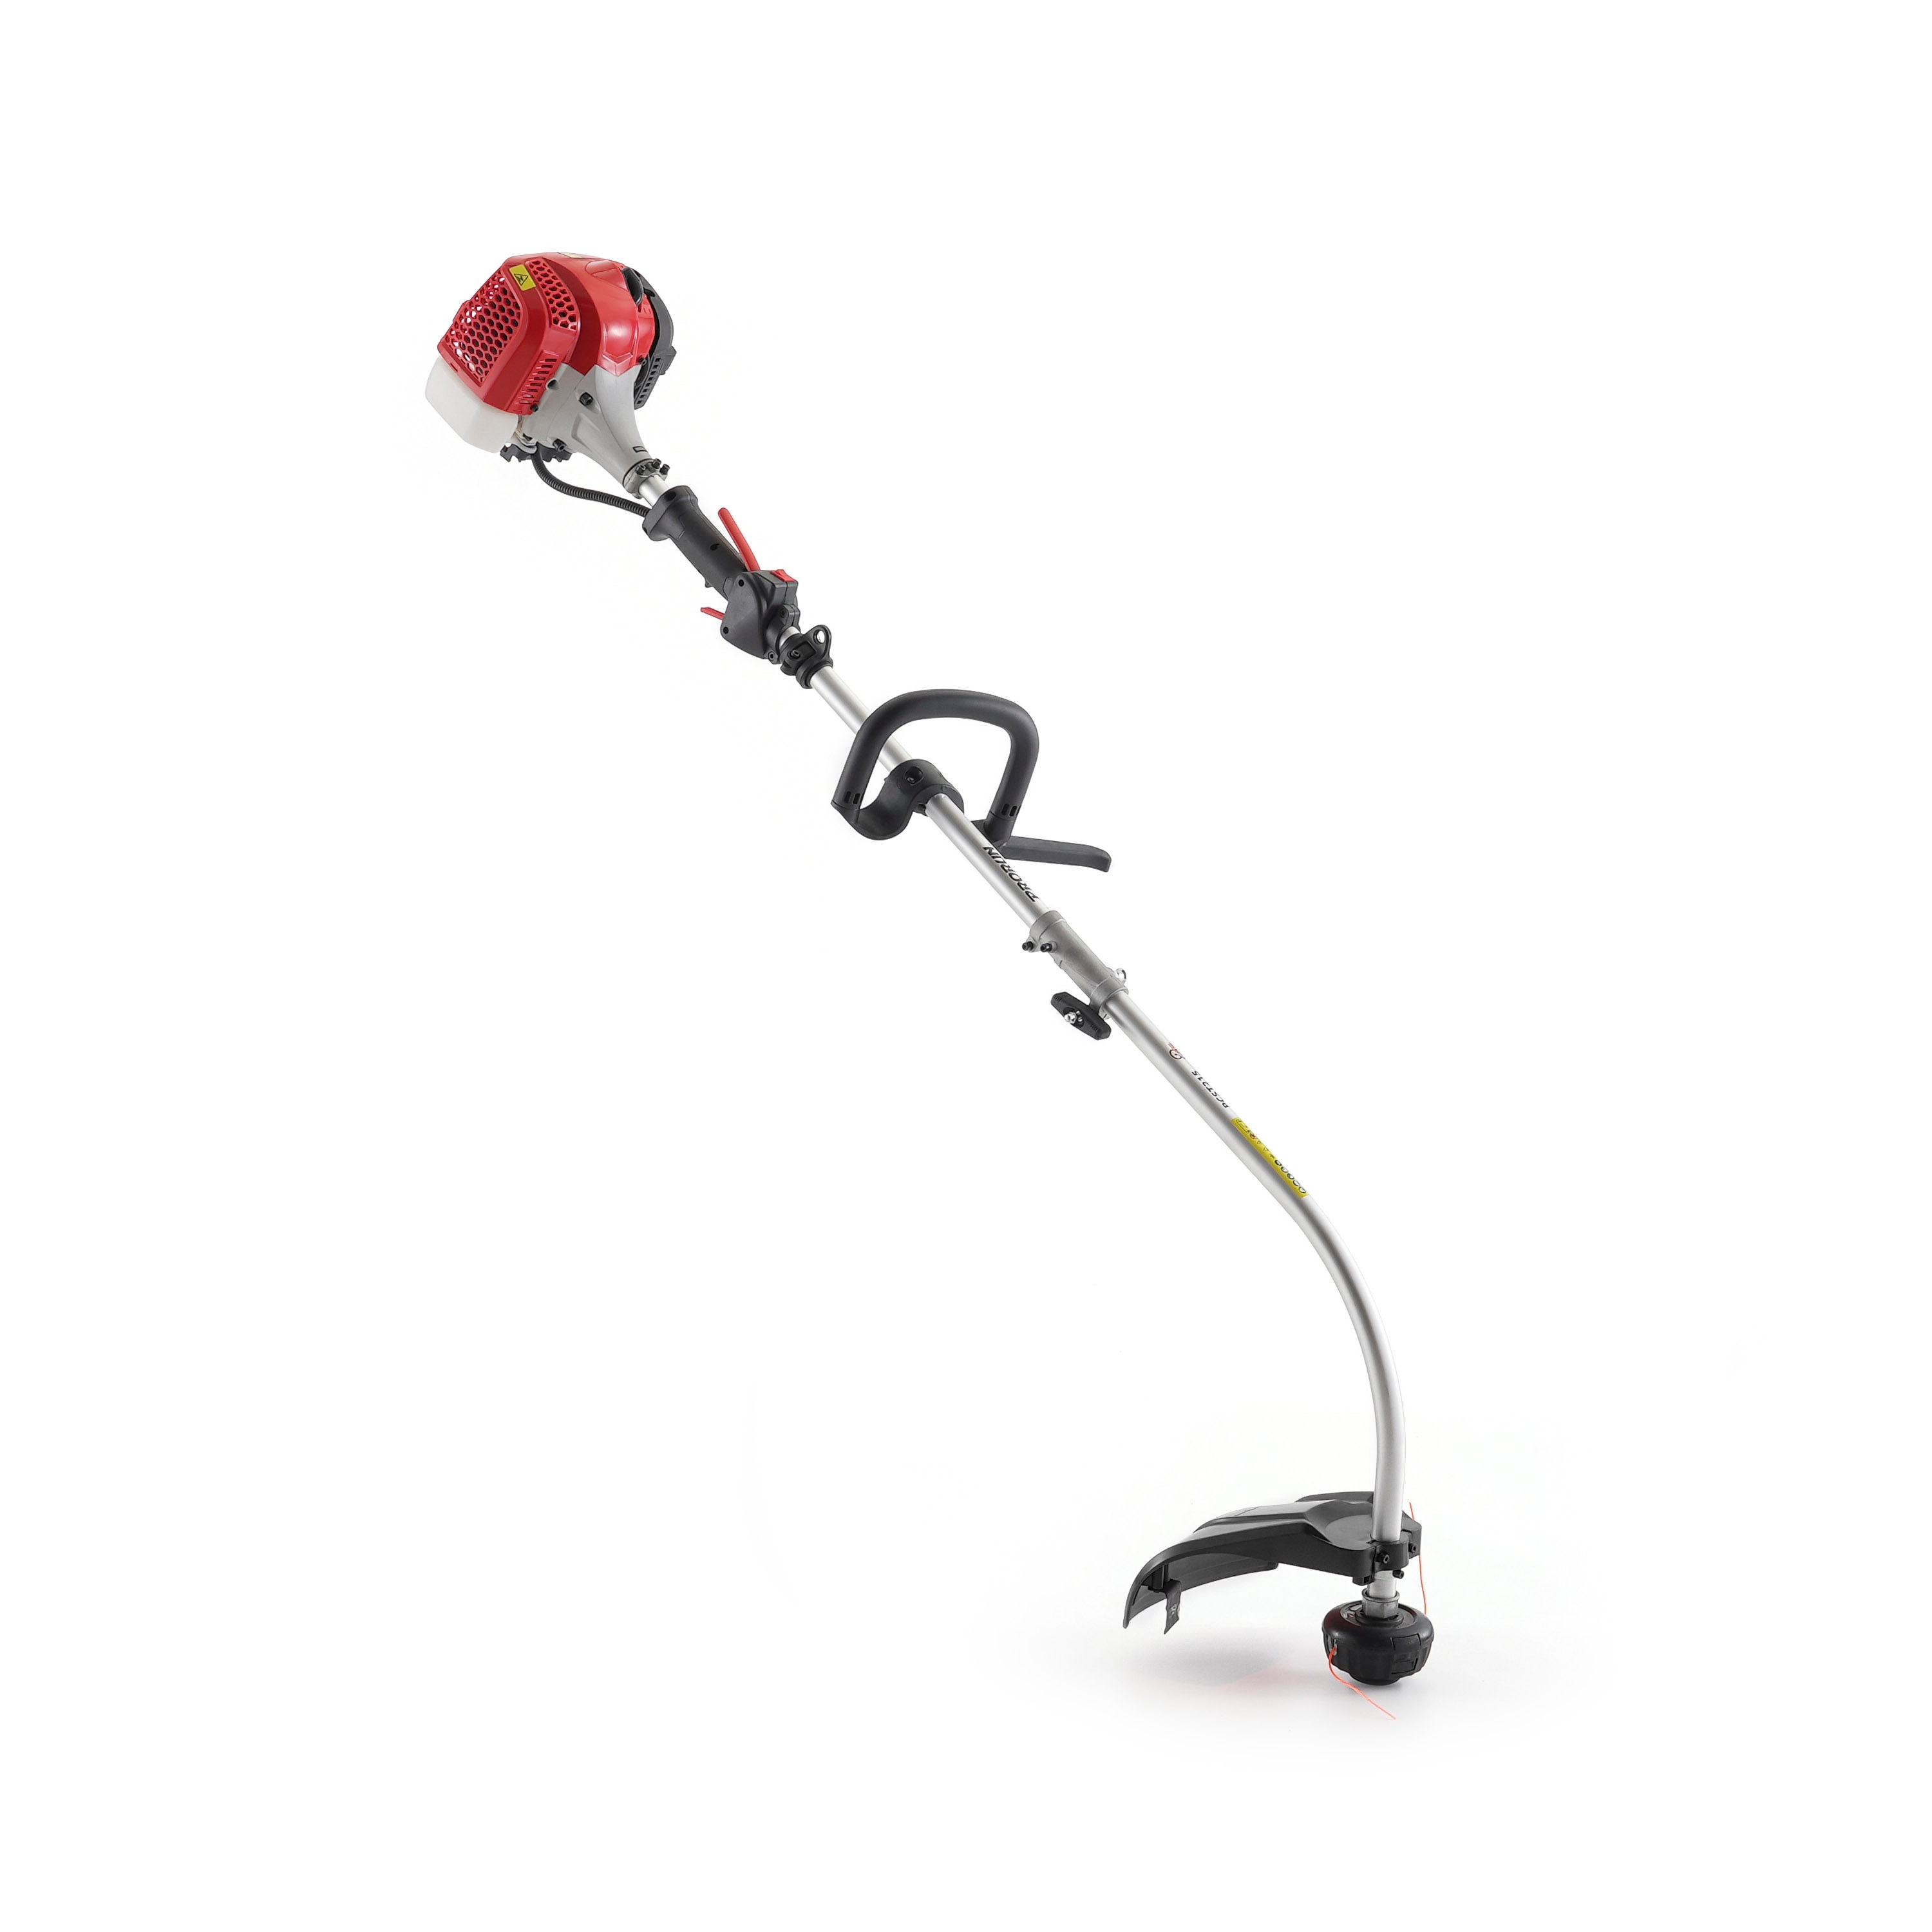 PRORUN PRORUN 25cc 15-in. Gas-Powered Curved Shaft Trimmer